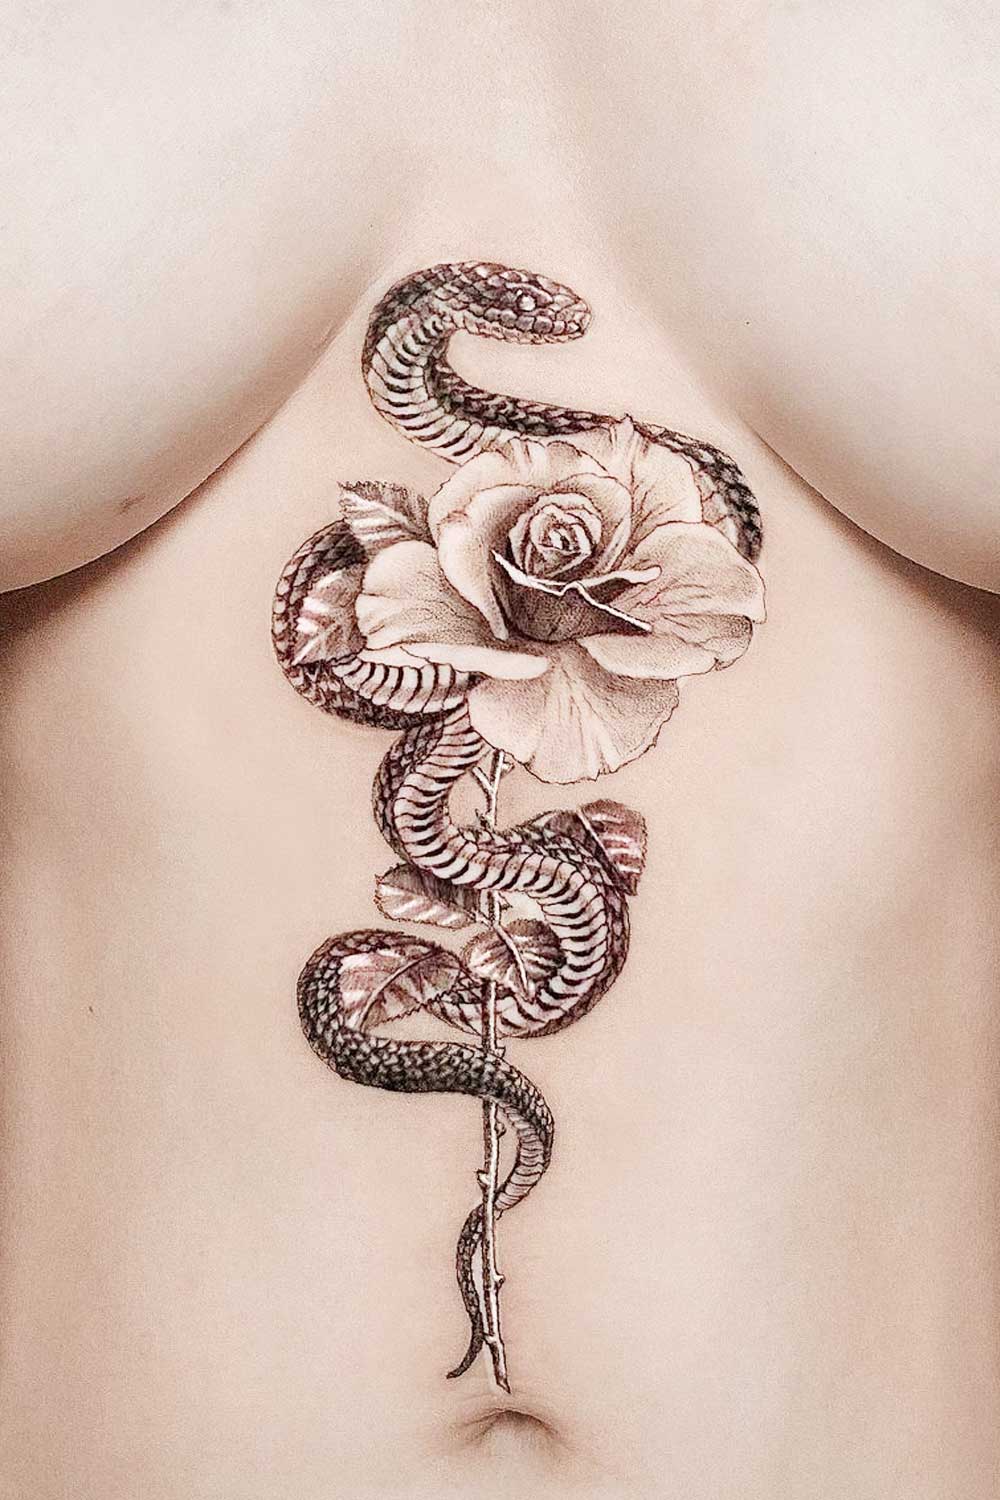 Sternum tattoos: What you need to know – Stories and Ink